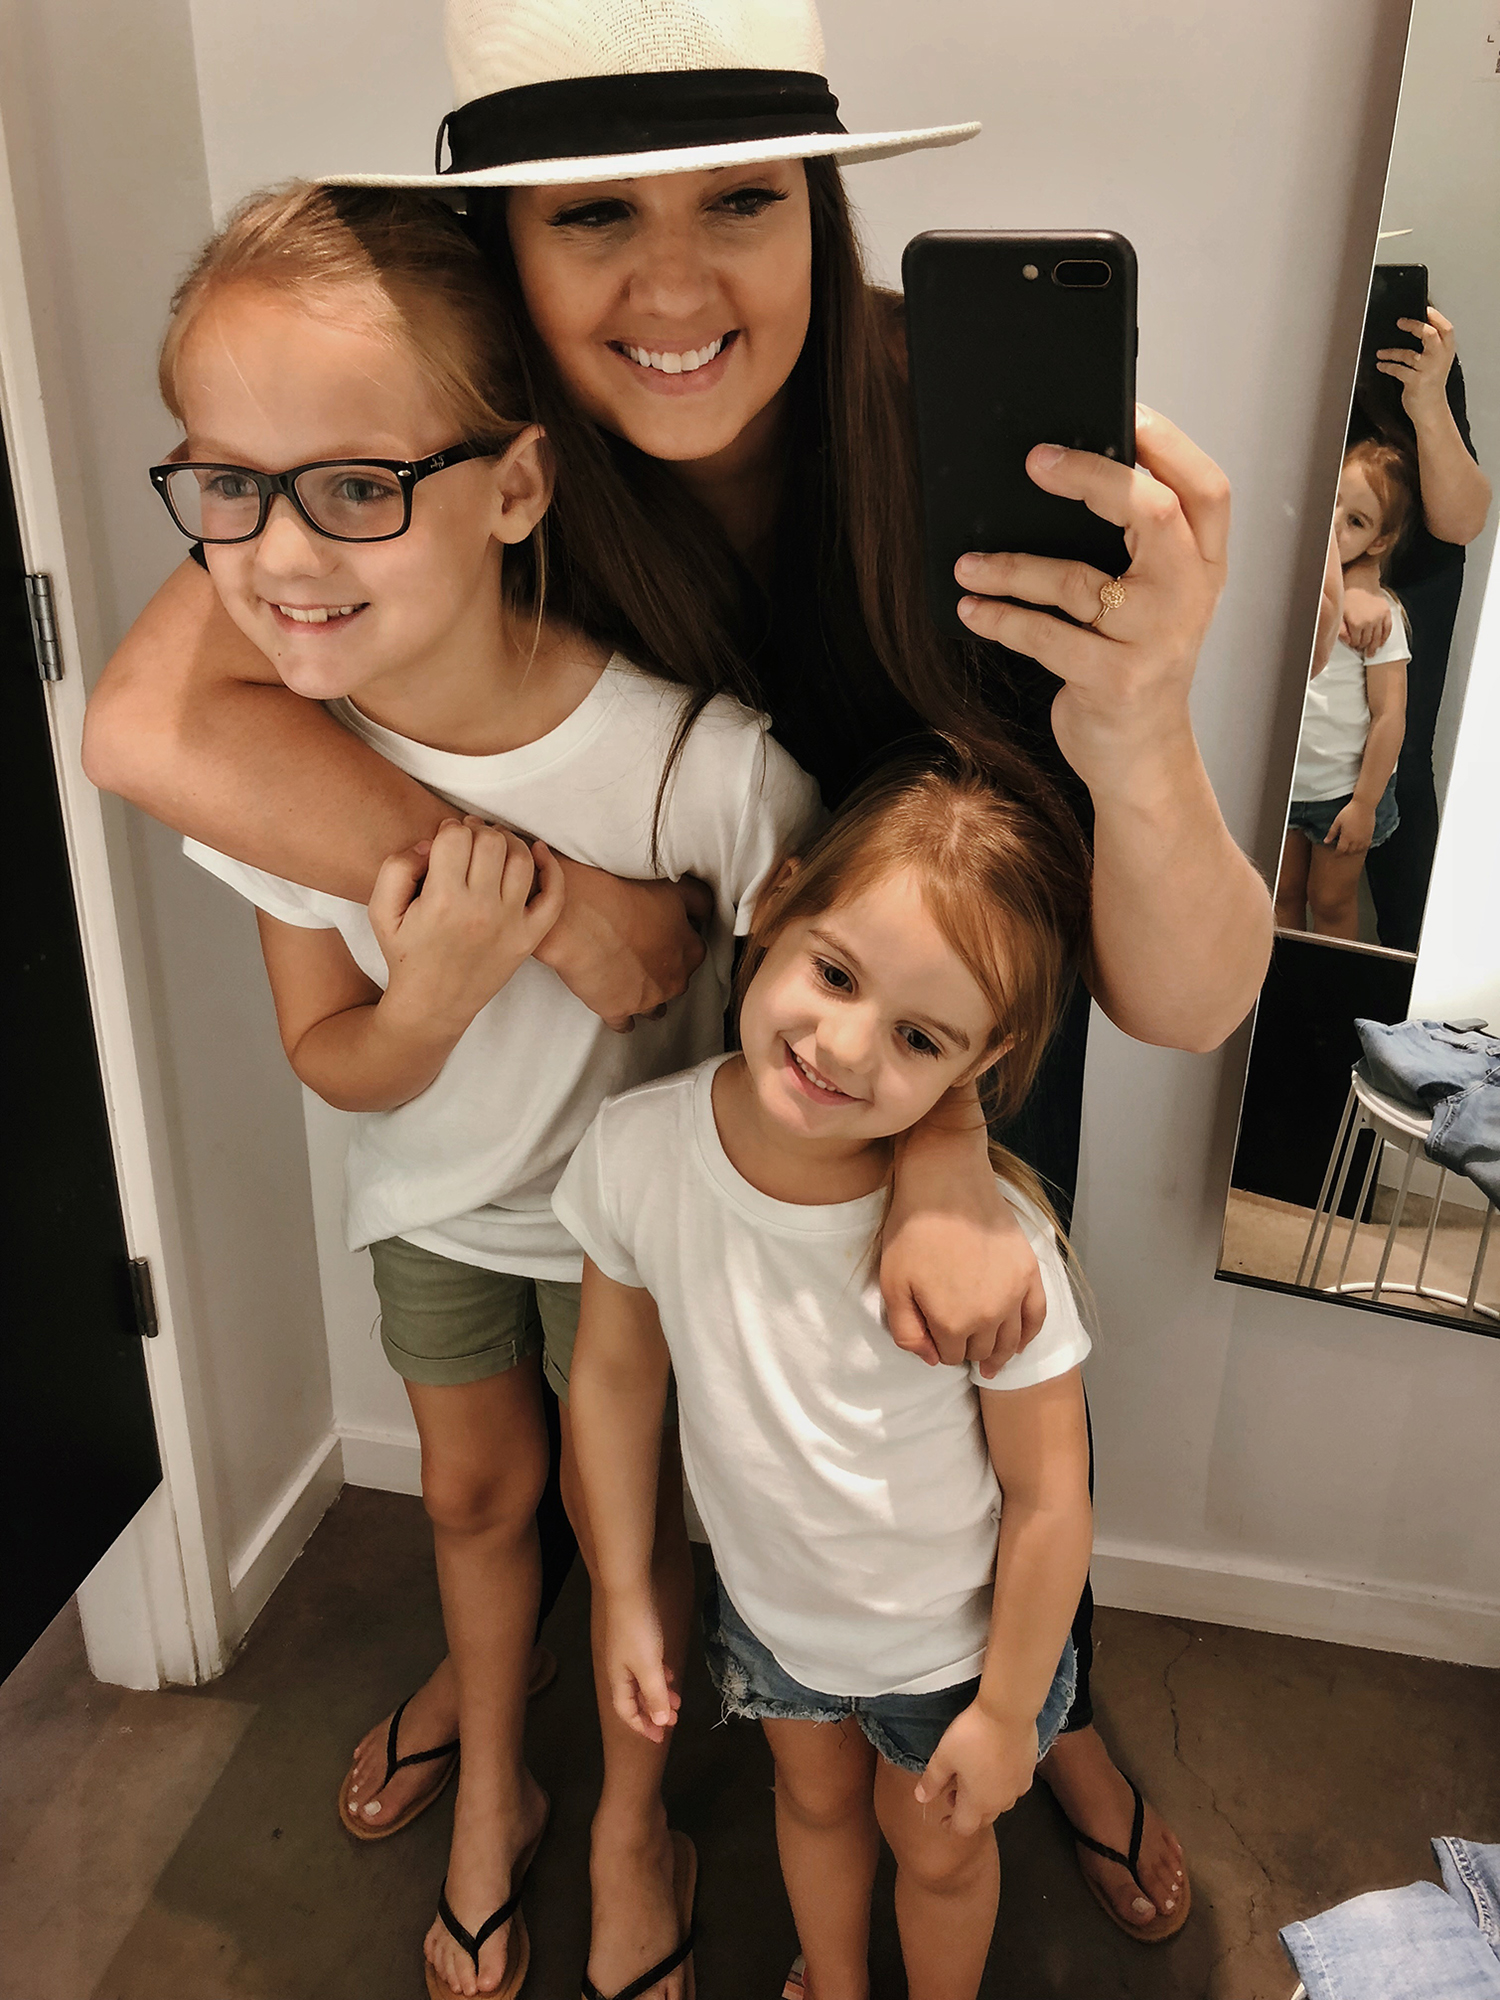 Family outings and weekends well spent are really where it's all at. We enjoy some retail therapy, our favorite cupcakes and neighborhood cruising. Family time really is the best time #Family #RaisingKids #Motherhood #Scottsdale #Arizona